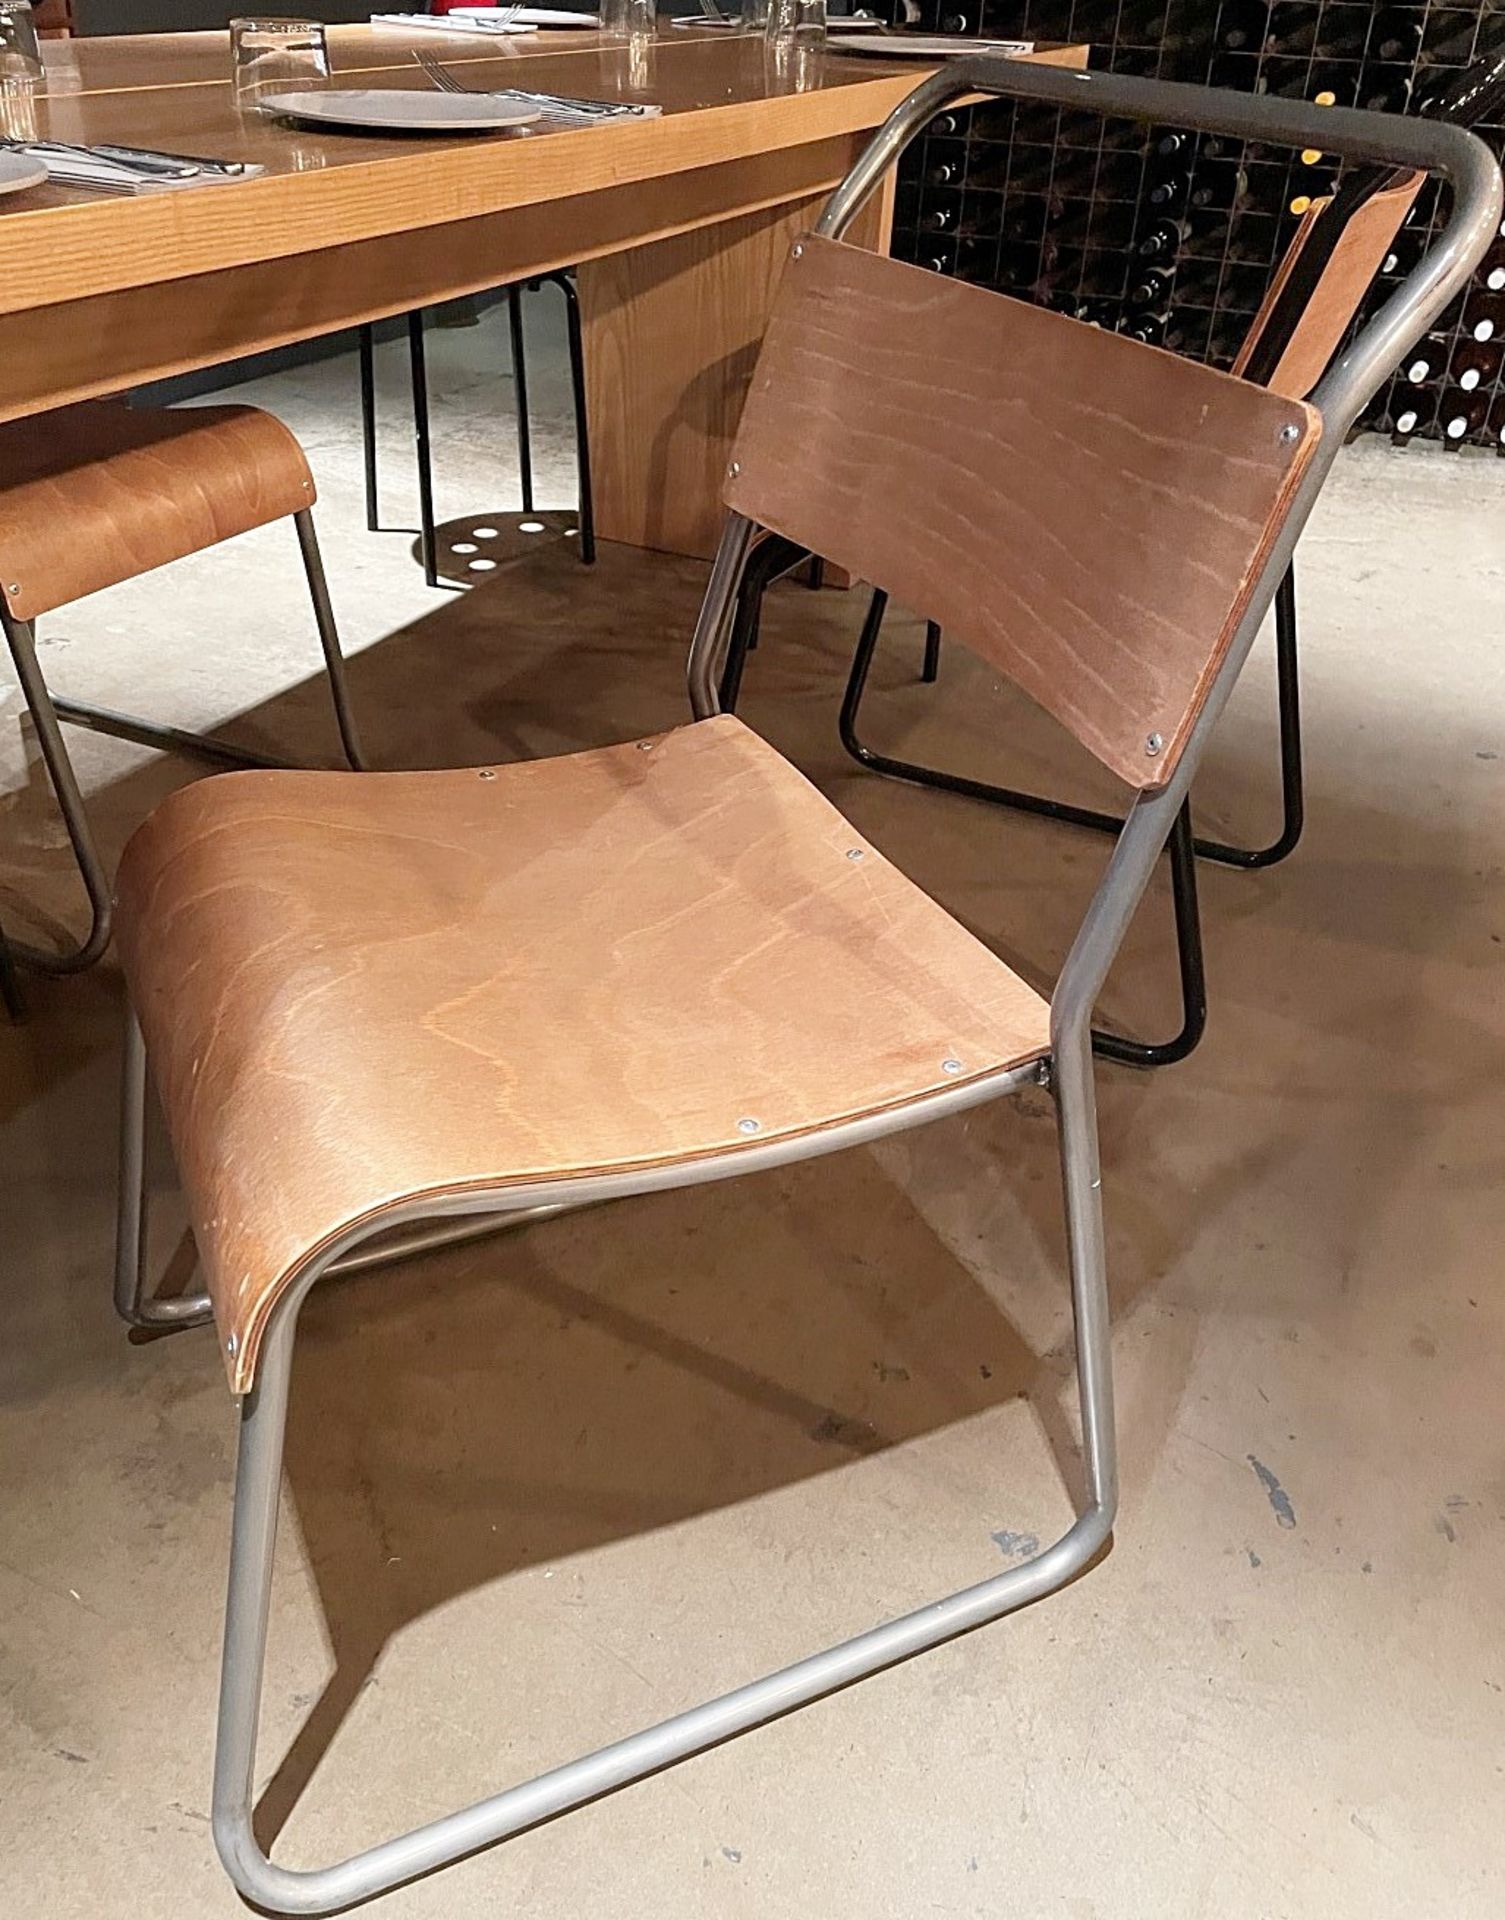 5 x Bistro Dining Chairs Featuring Curved Light Wood Back And Seats With Sturdy Metal Frames